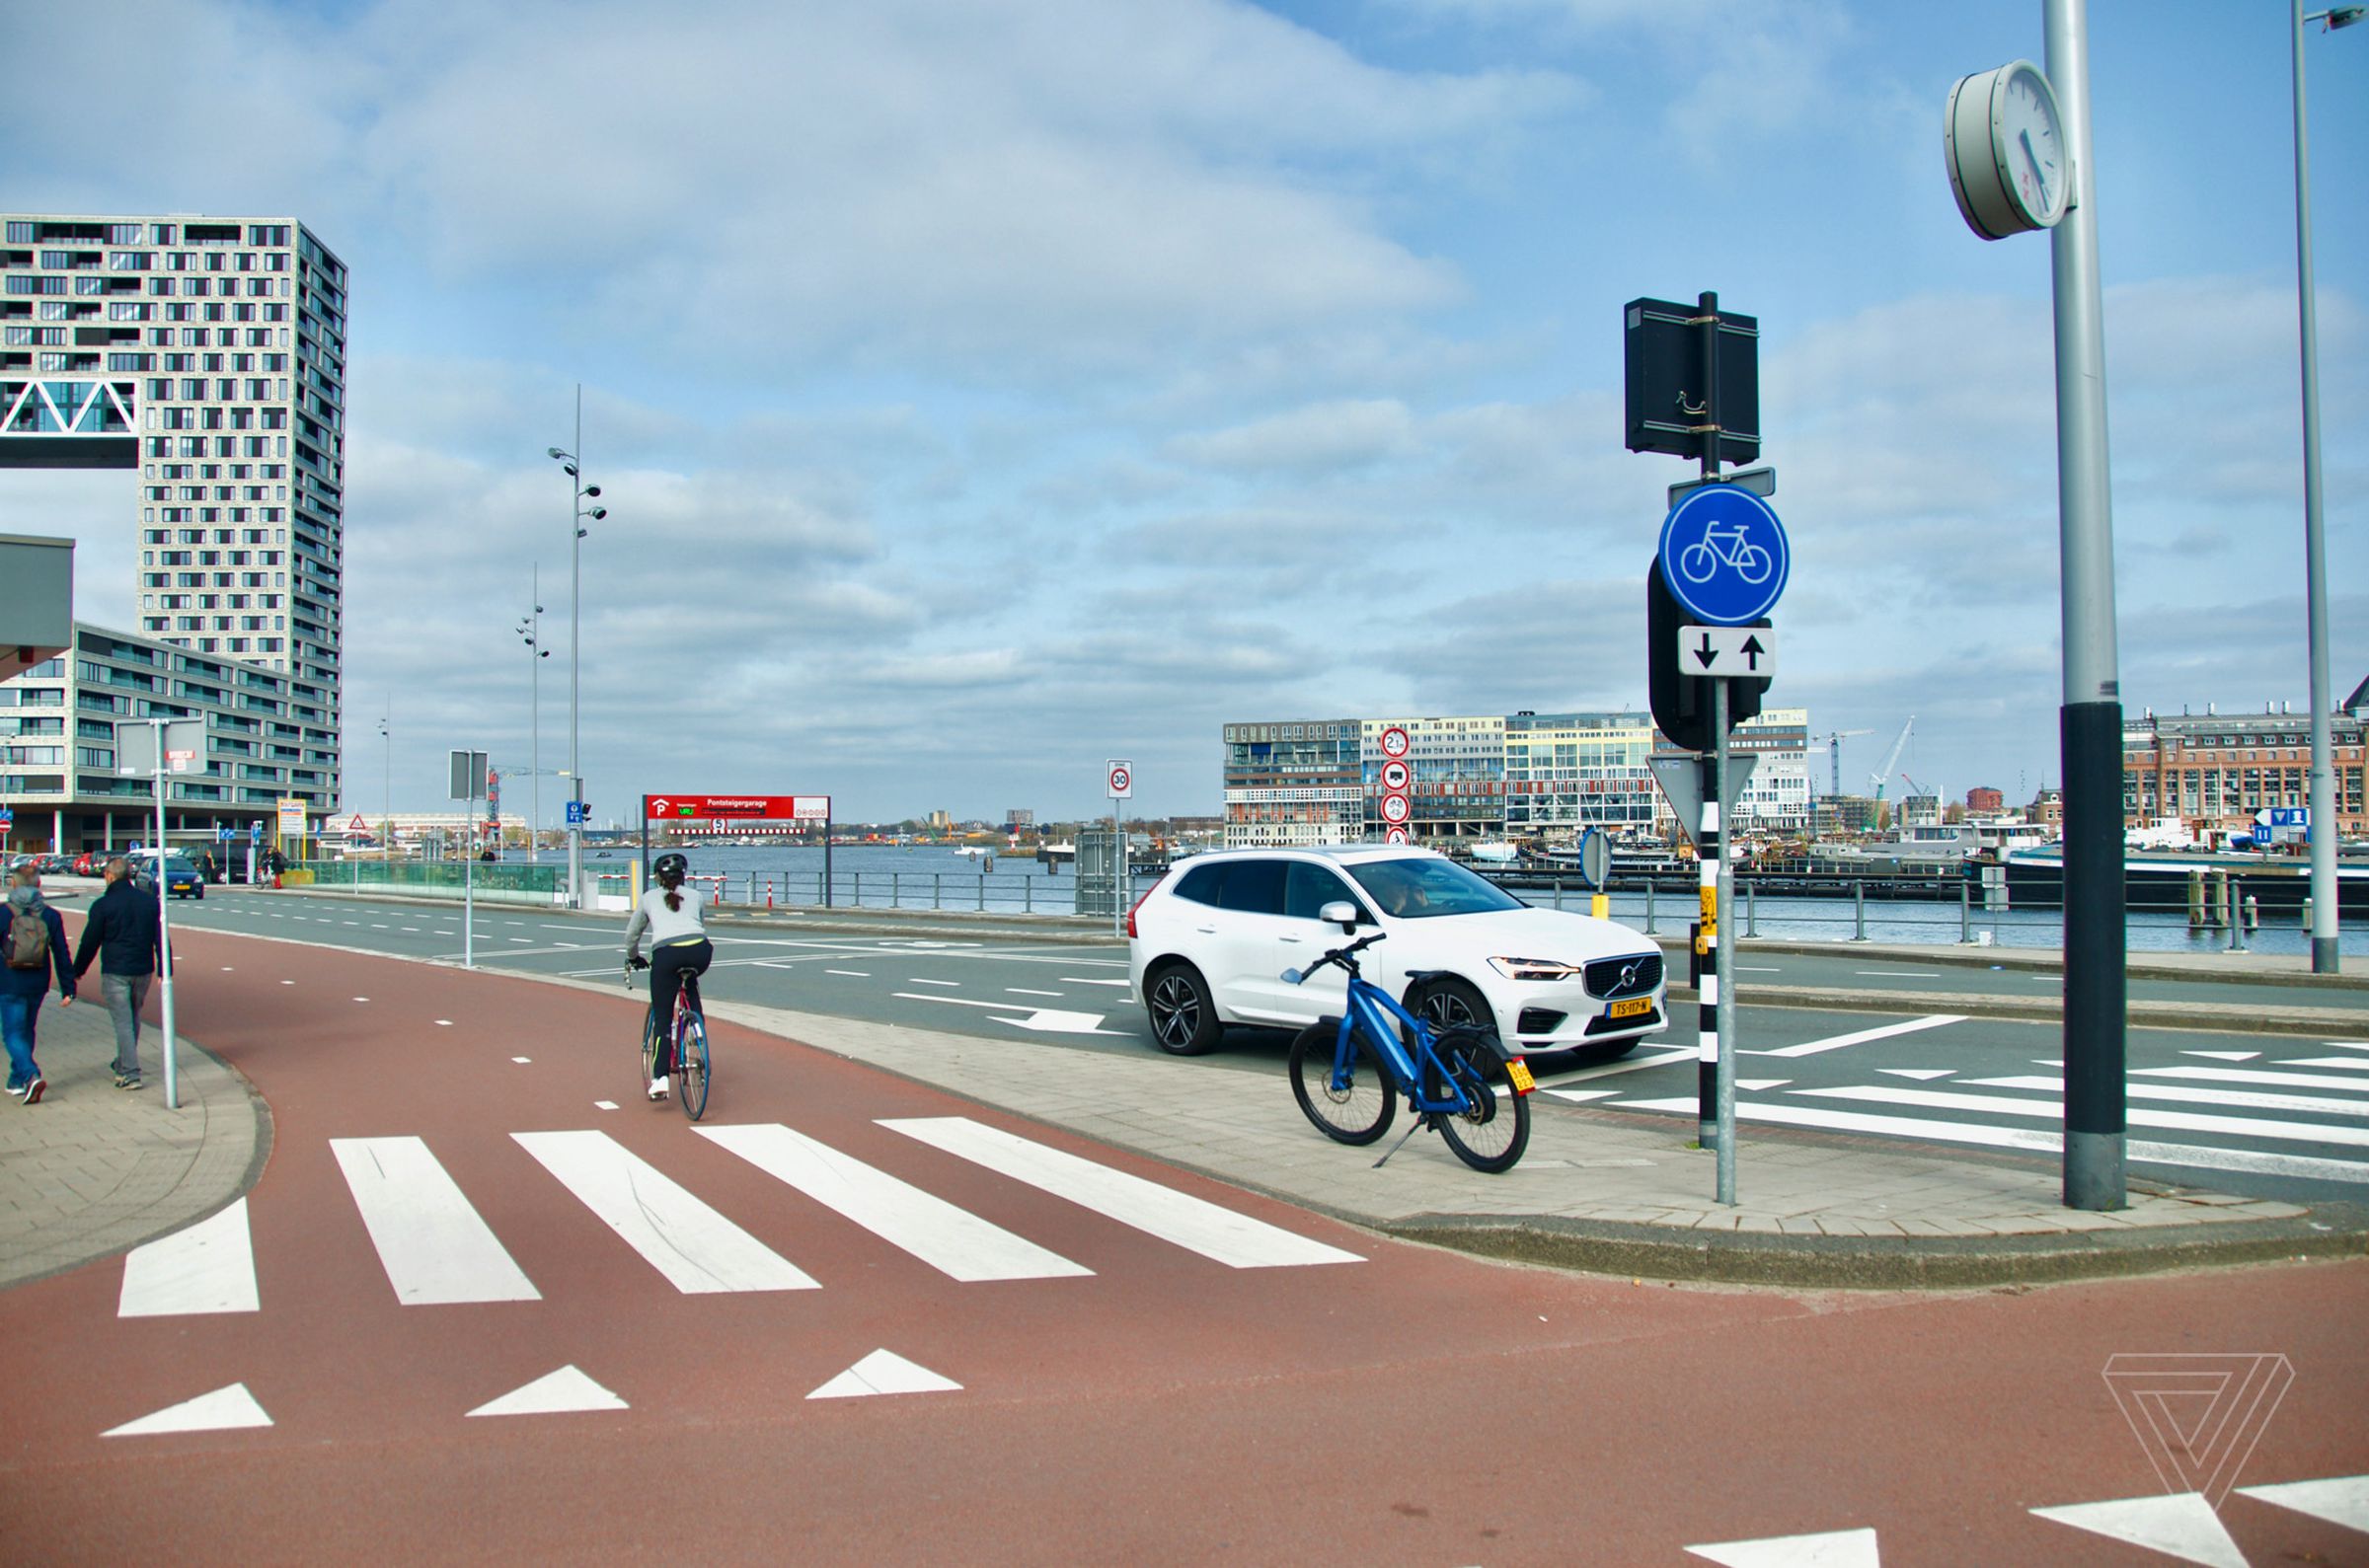 Speed pedelecs are forbidden on Dutch bike lanes like the one above and must share roads with cars instead.